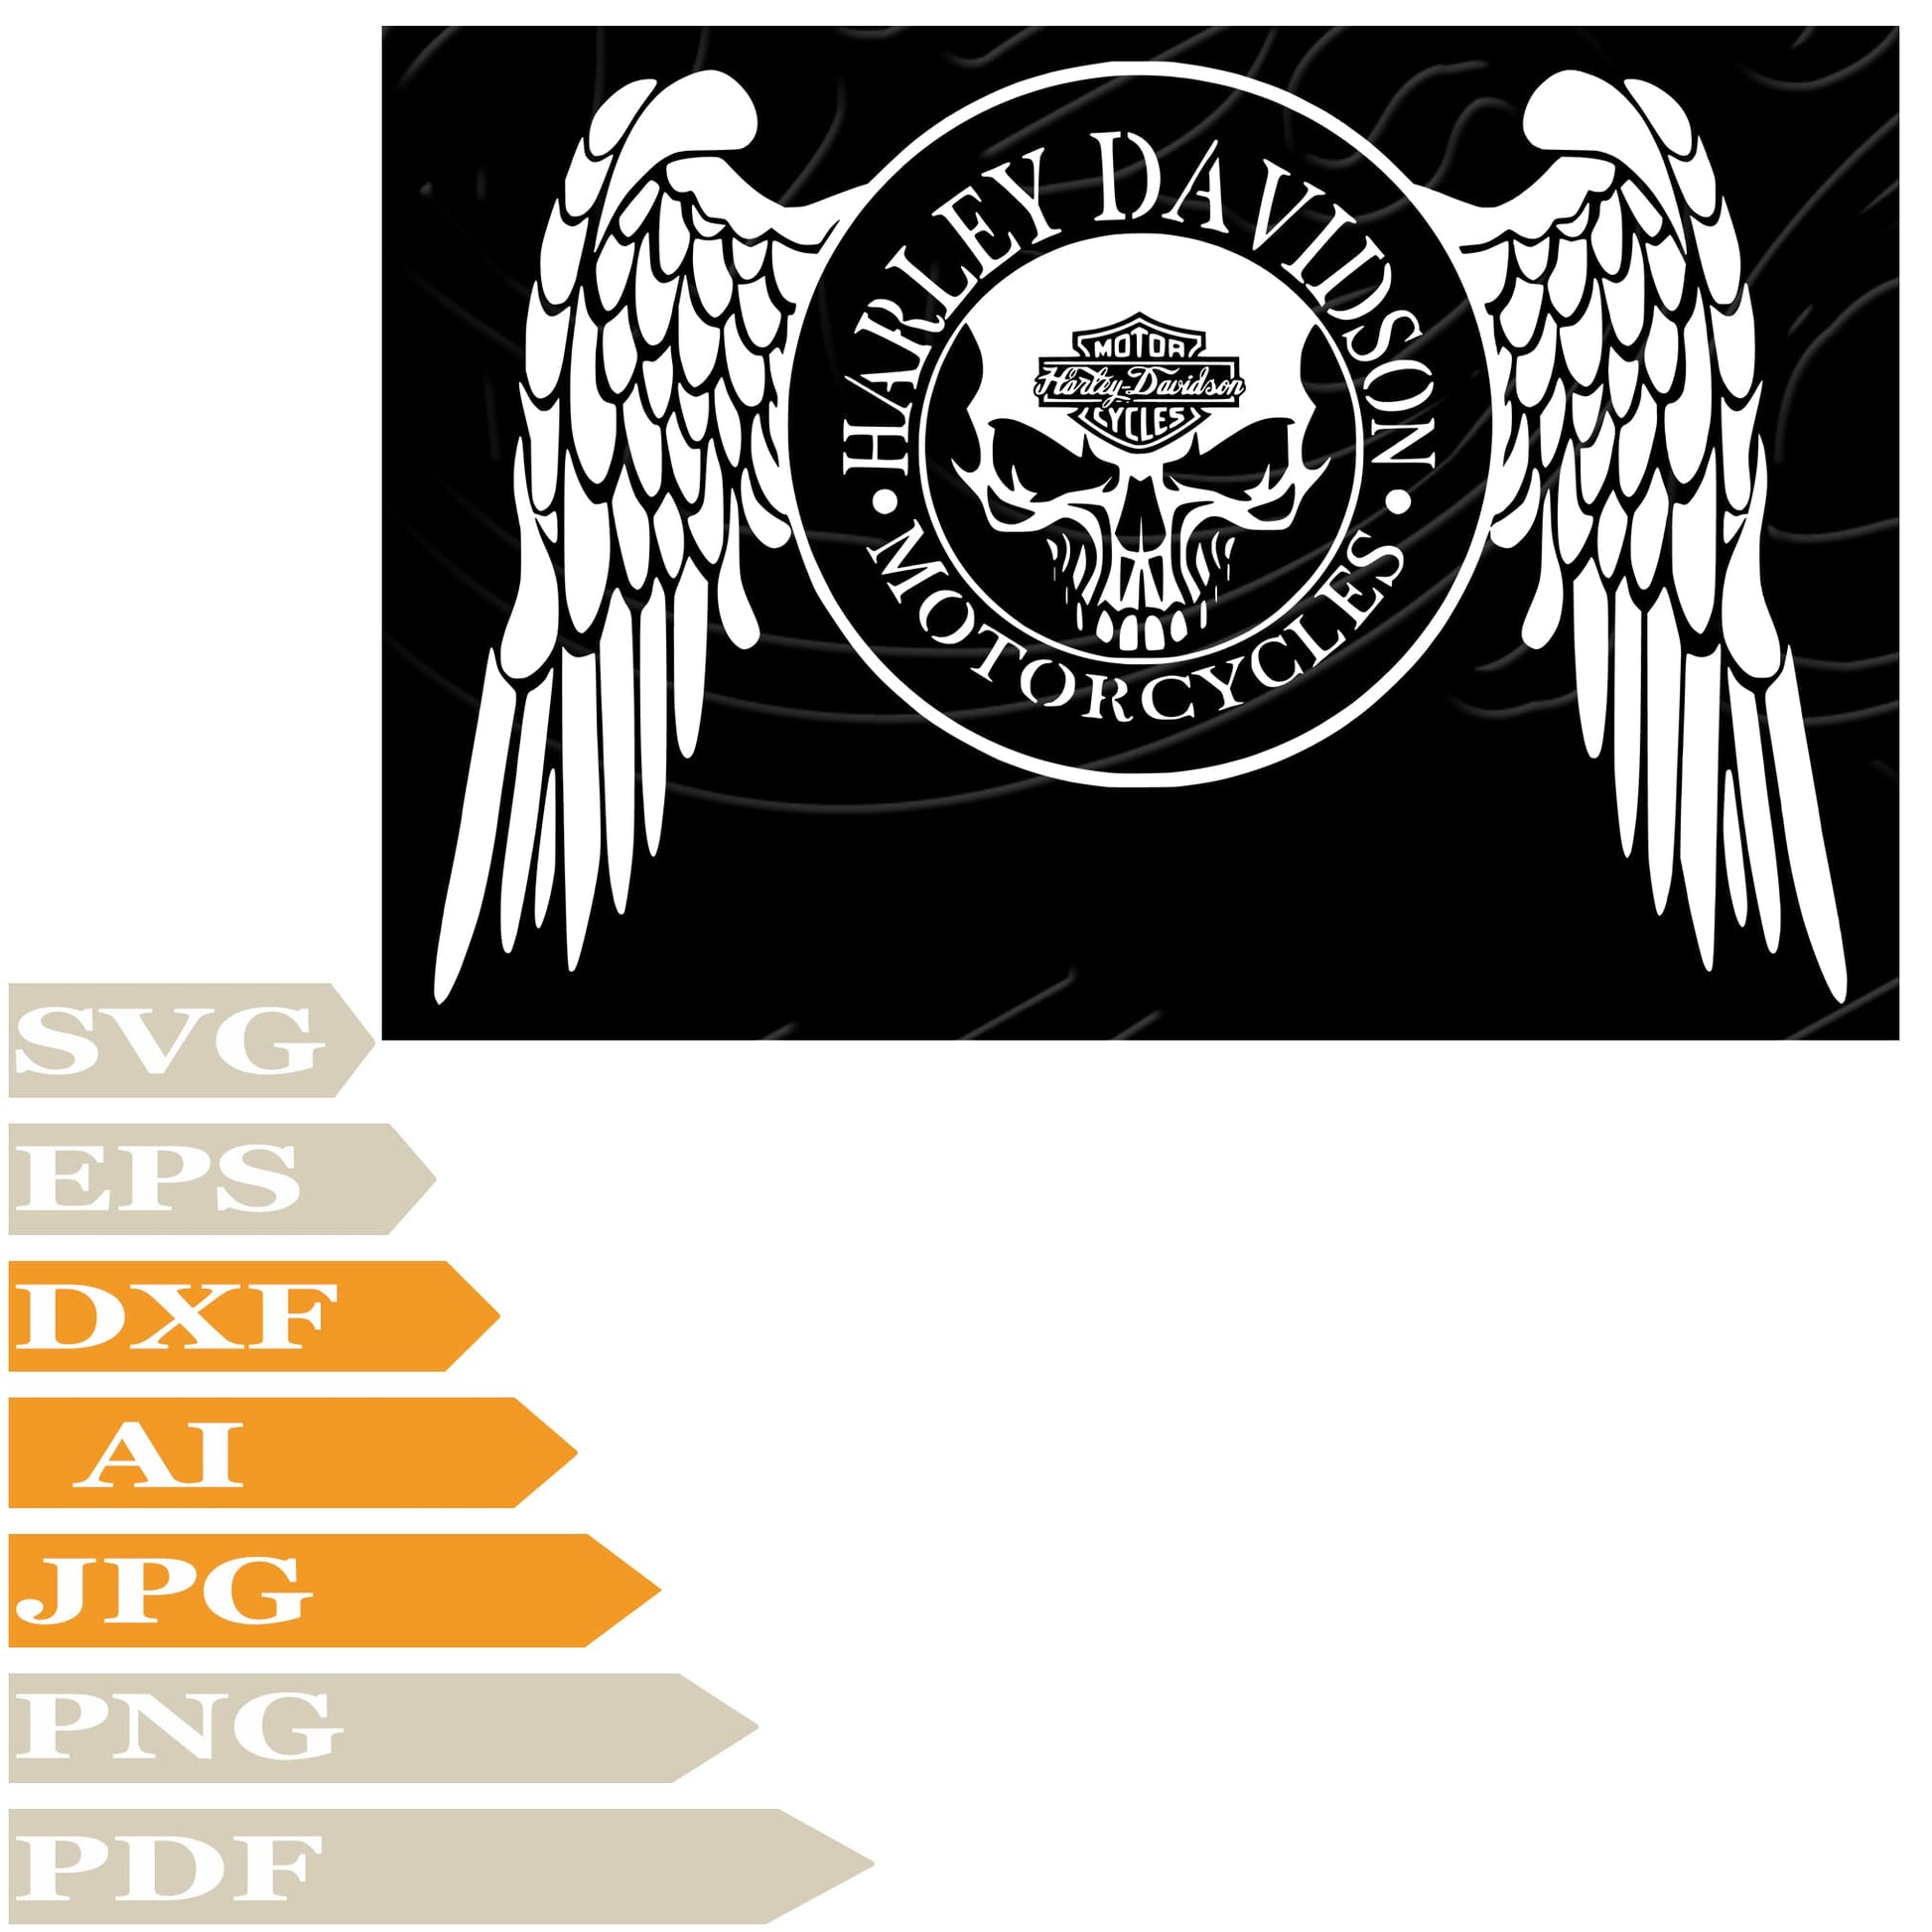 Harley Davidson Logo ﻿SVG-Angel Wings Harley Davidson Personalized SVG-Skull Harley Davidson Logo Drawing SVG-Harley Davidson Logo Vector Illustration-PNG-Decal-Cricut-Digital Files-Clip Art-Cut File-For Shirts-Silhouette